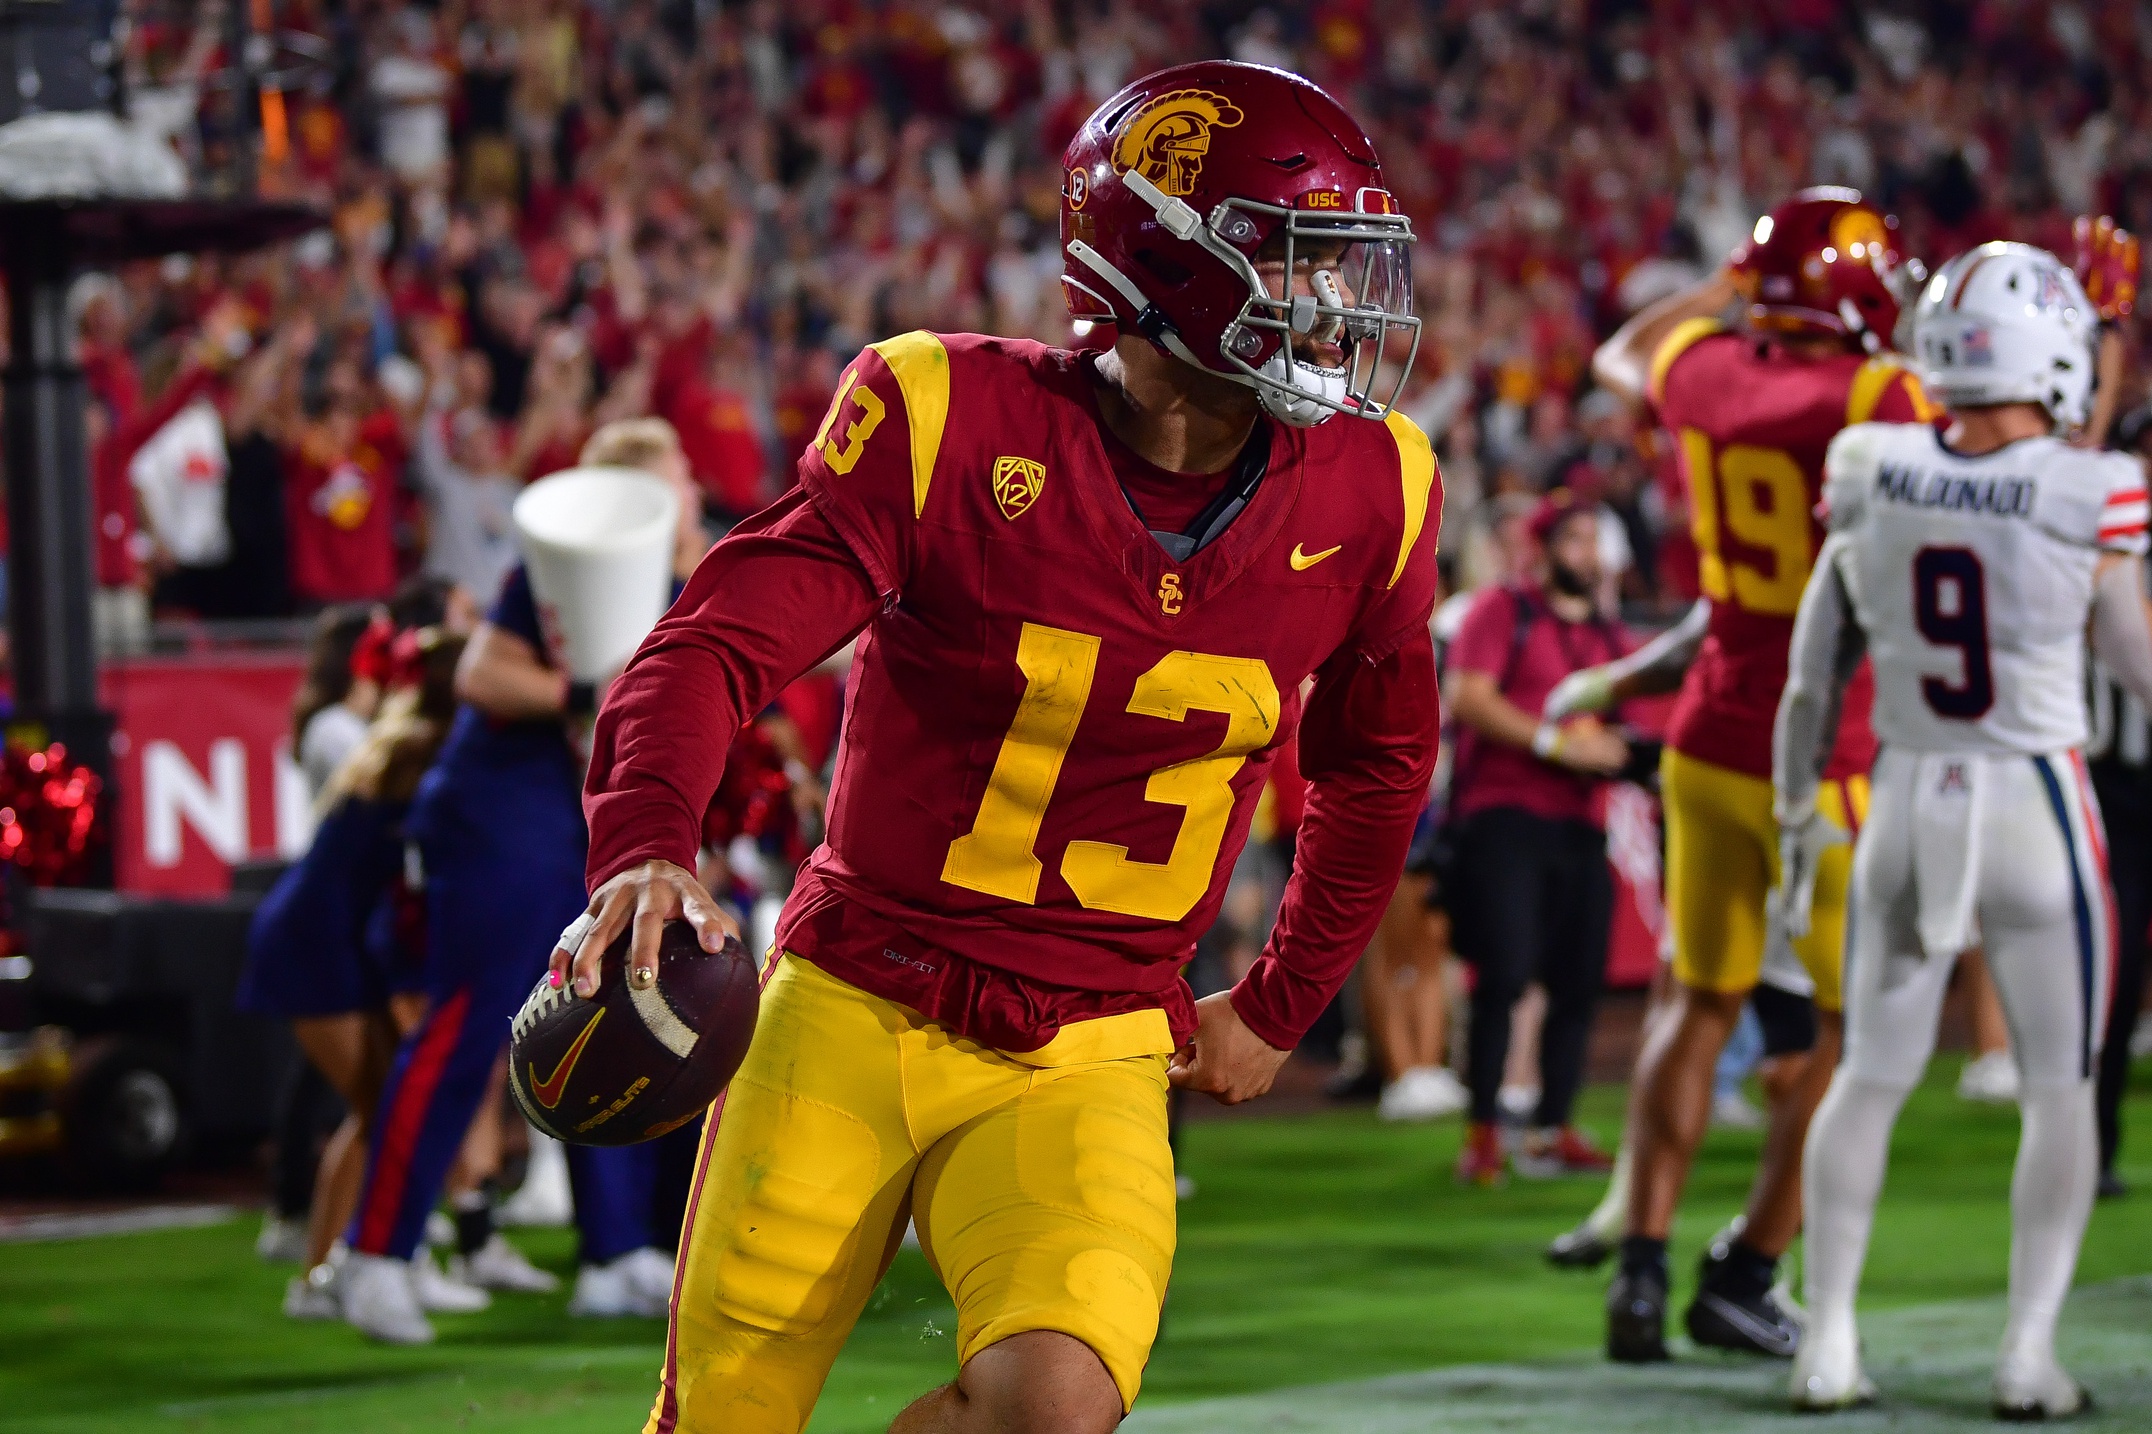 Caleb Williams (13) scores on the two point conversion against the Arizona Wildcats during the third overtime at Los Angeles Memorial Coliseum.